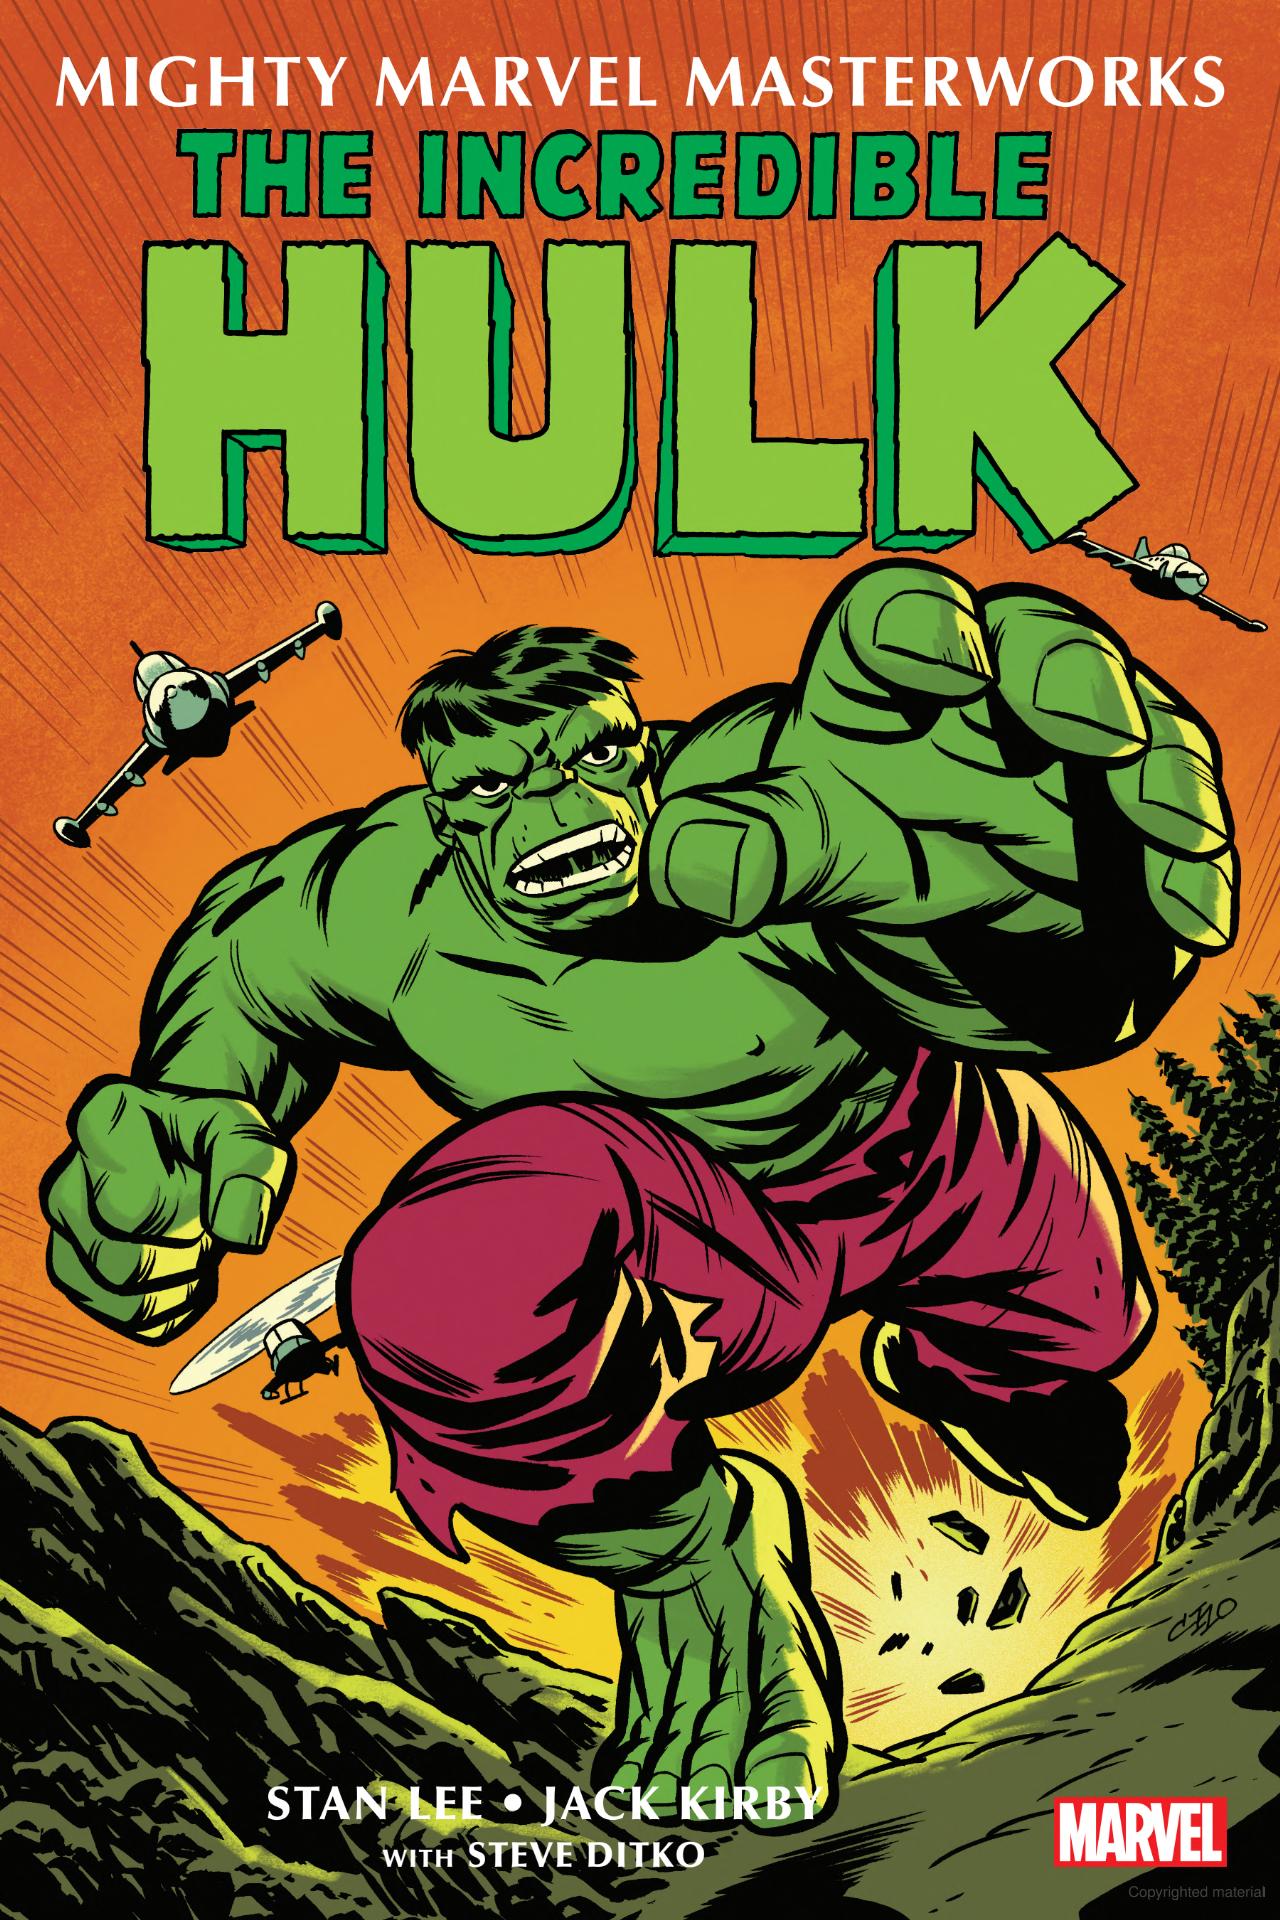 Mighty Marvel Masterworks: The Incredible Hulk - The Green Goliath Vol. 1